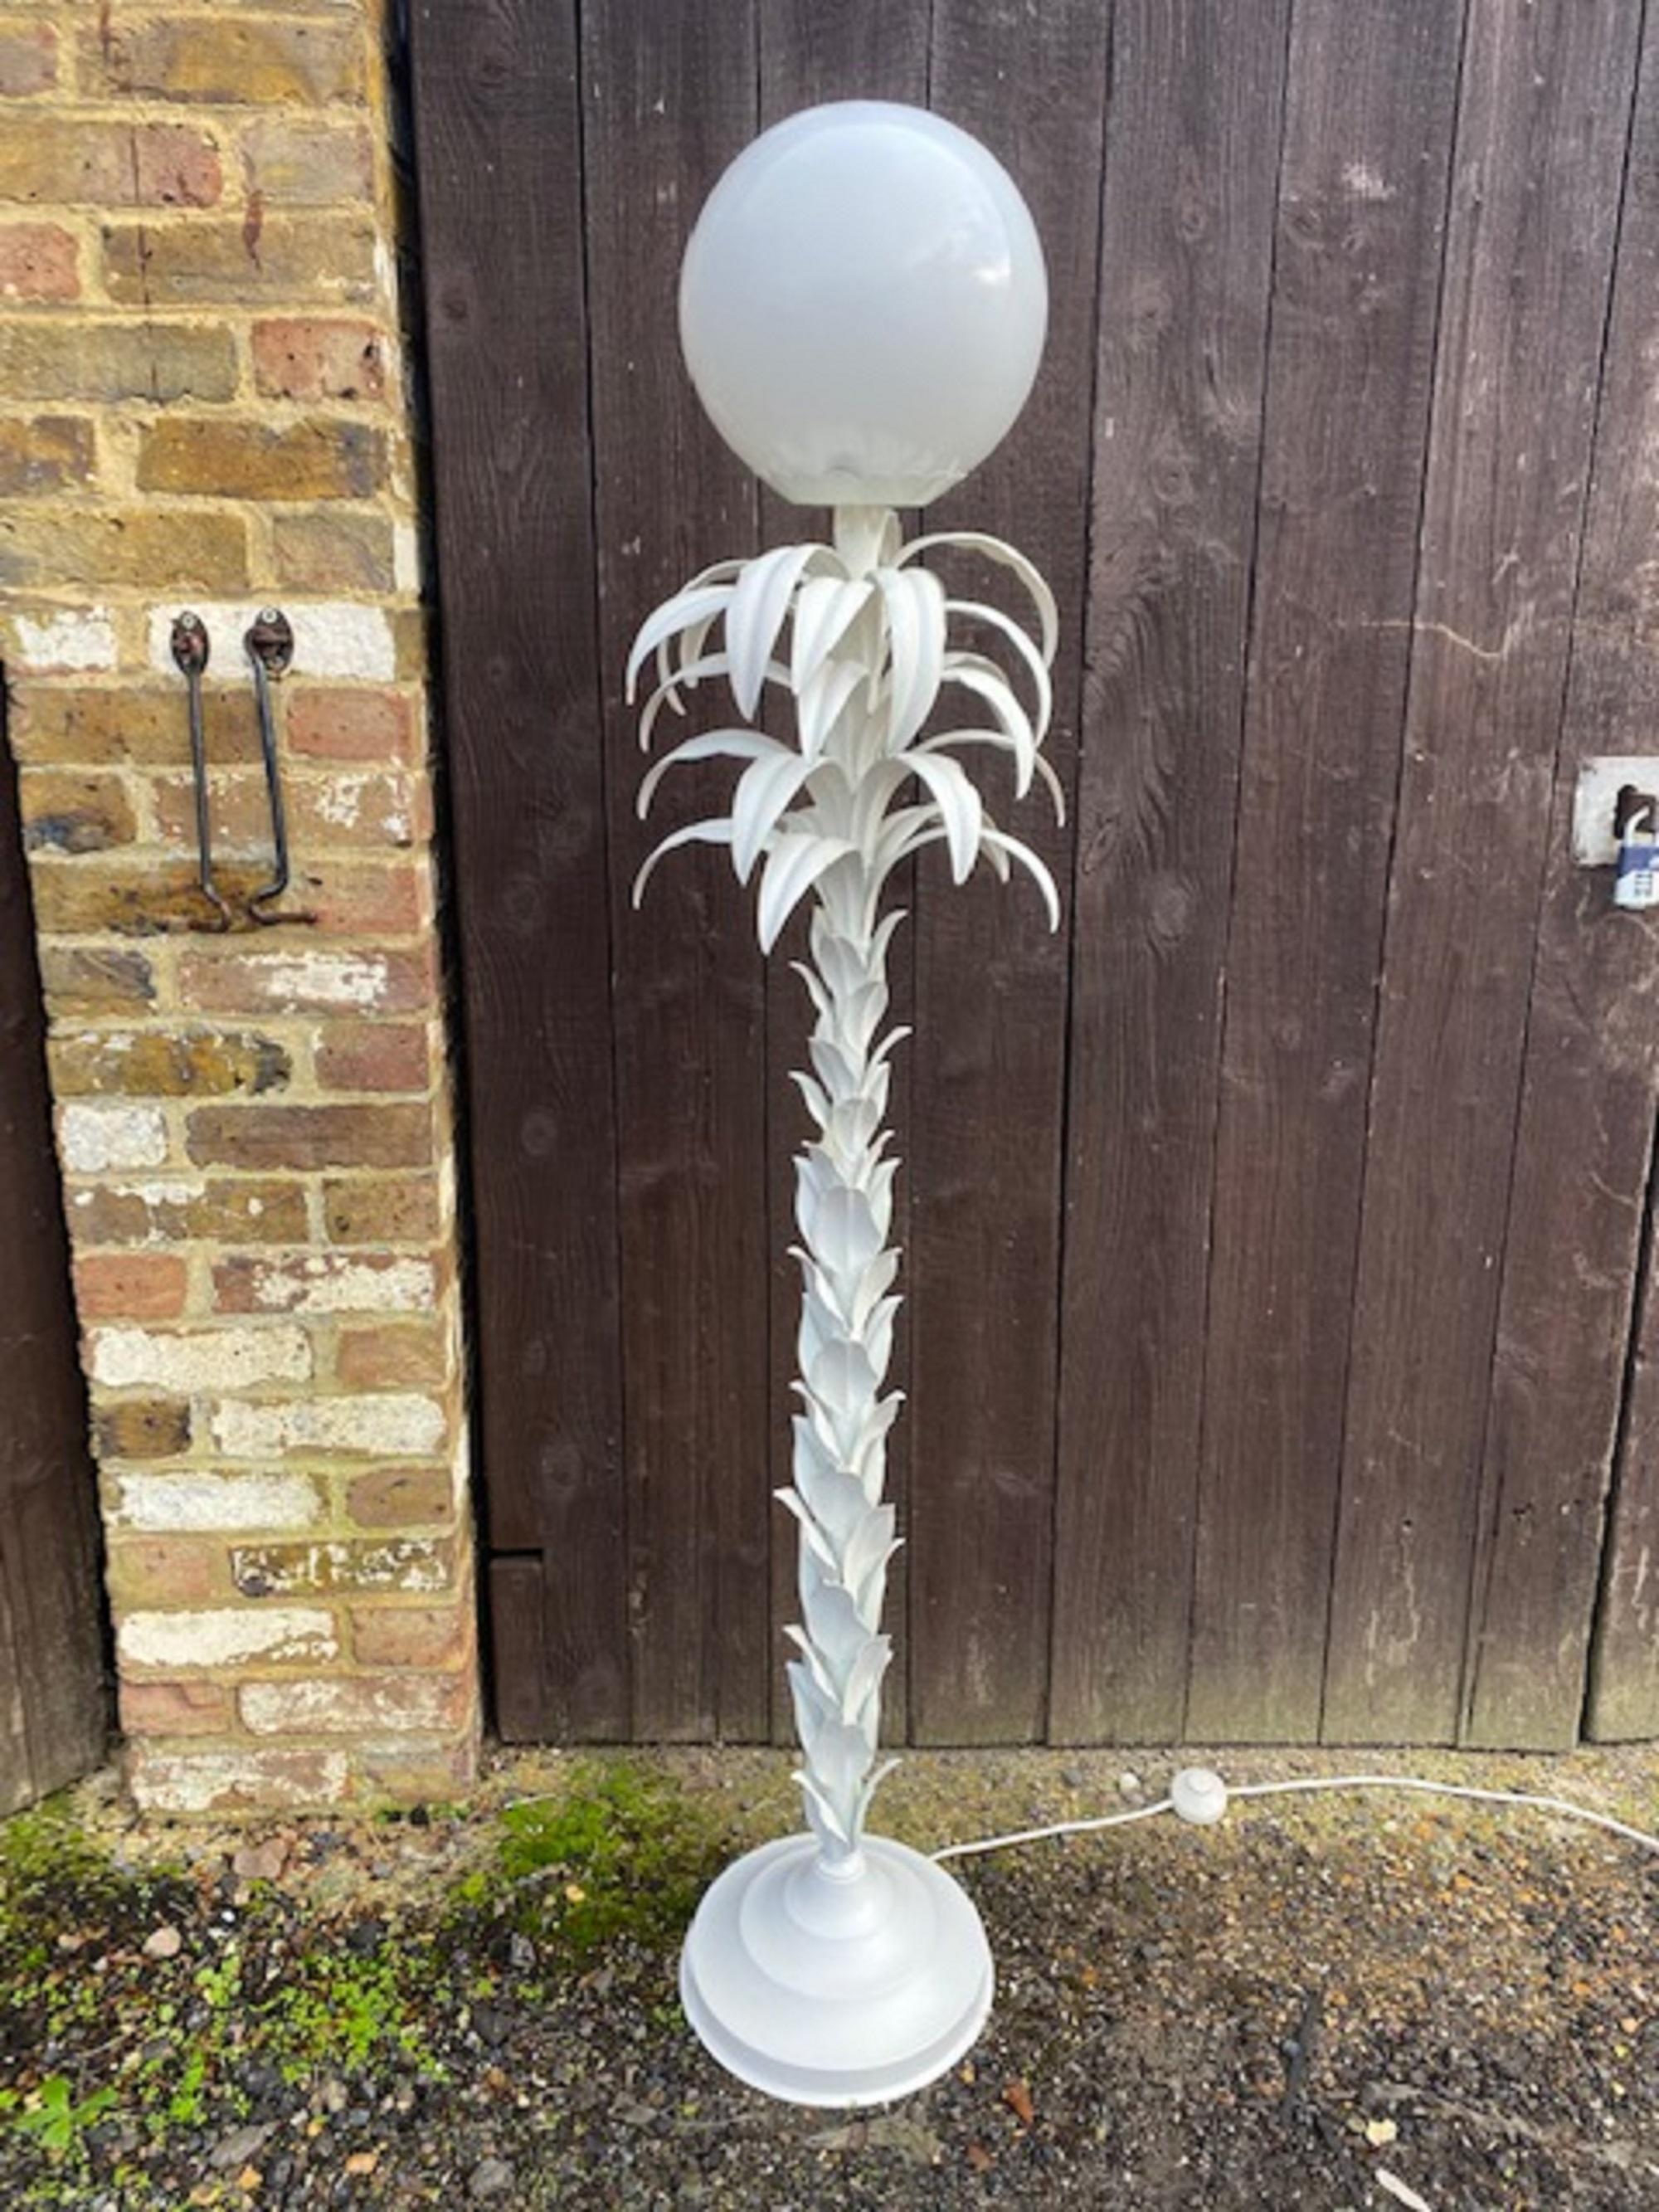 Mid-Century White Palm Tree Floor Lamp in the Manner of Sergio Terzani, French, 1970s

A fabulous vintage Palm Tree floor lamp, in the style of Sergio Terzani.  Heavily decorated with white painted tole leaves around the central stem, which turn